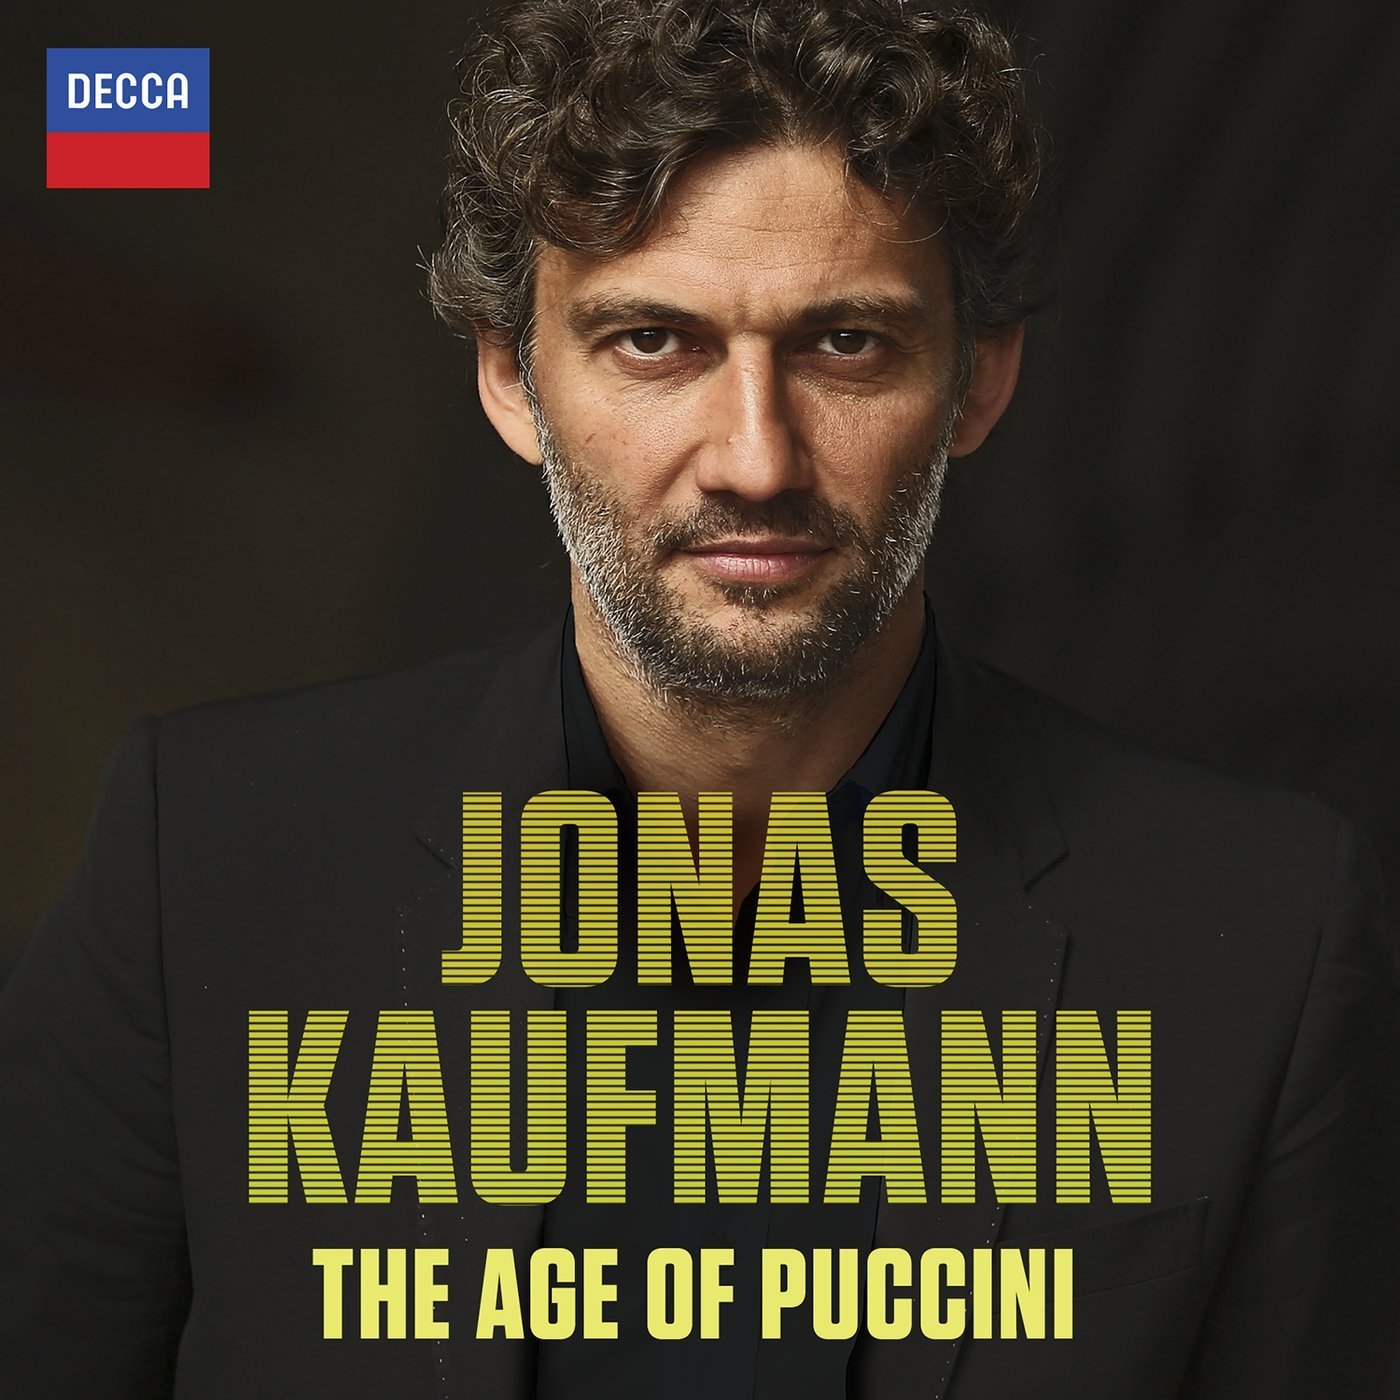 The Age Of Puccini